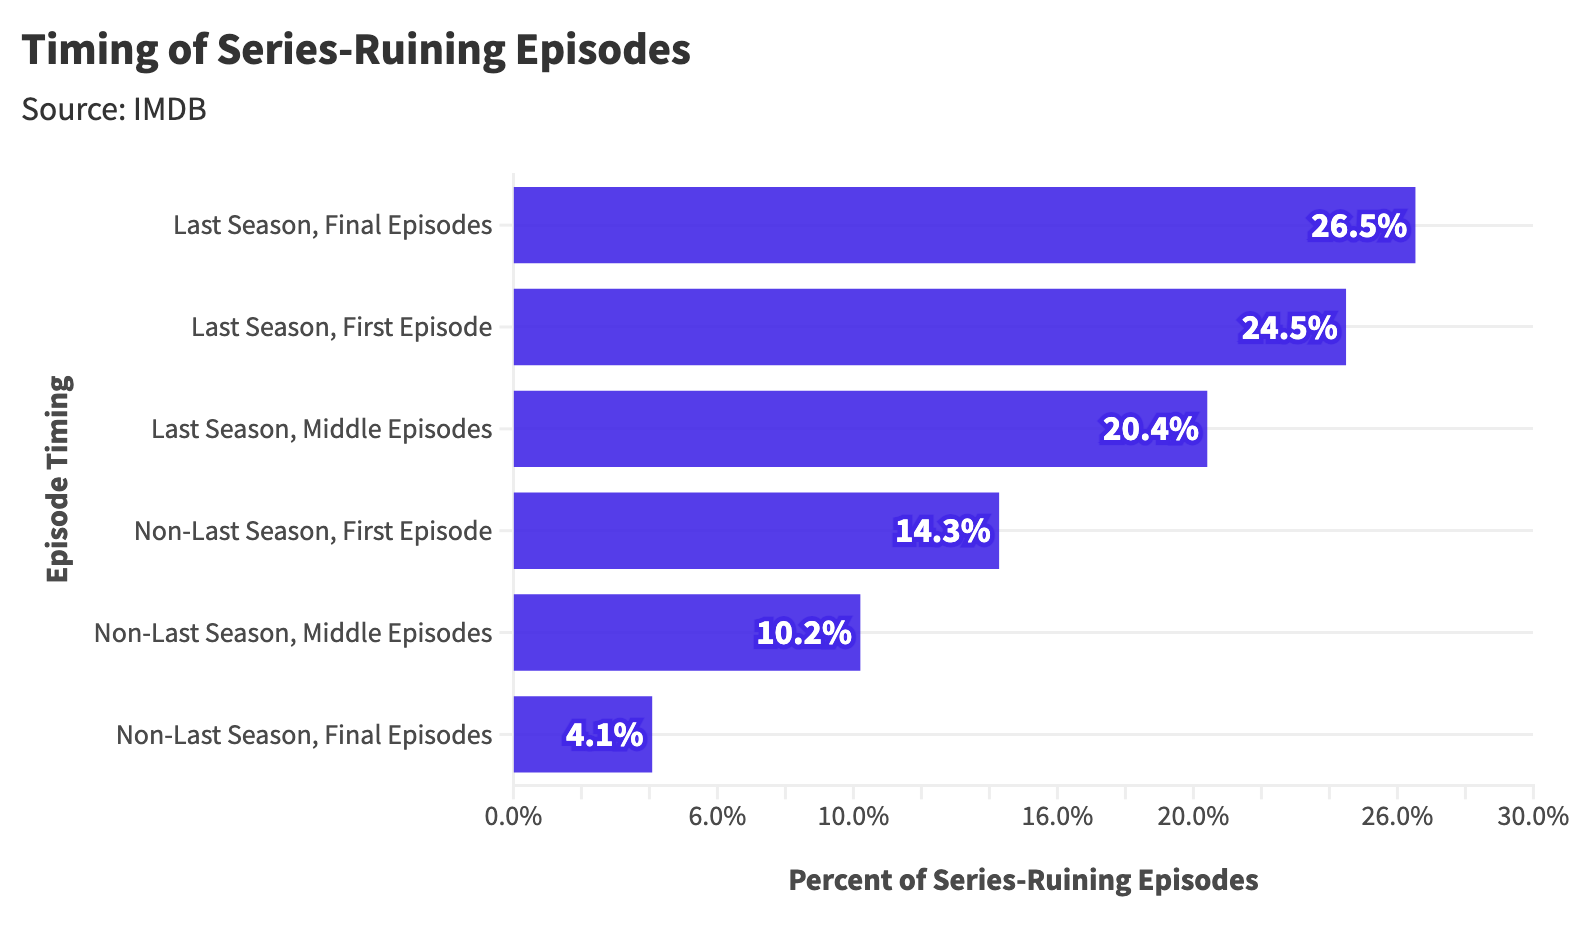 A Statistical Analysis of TV Series Finales vs Average Episode